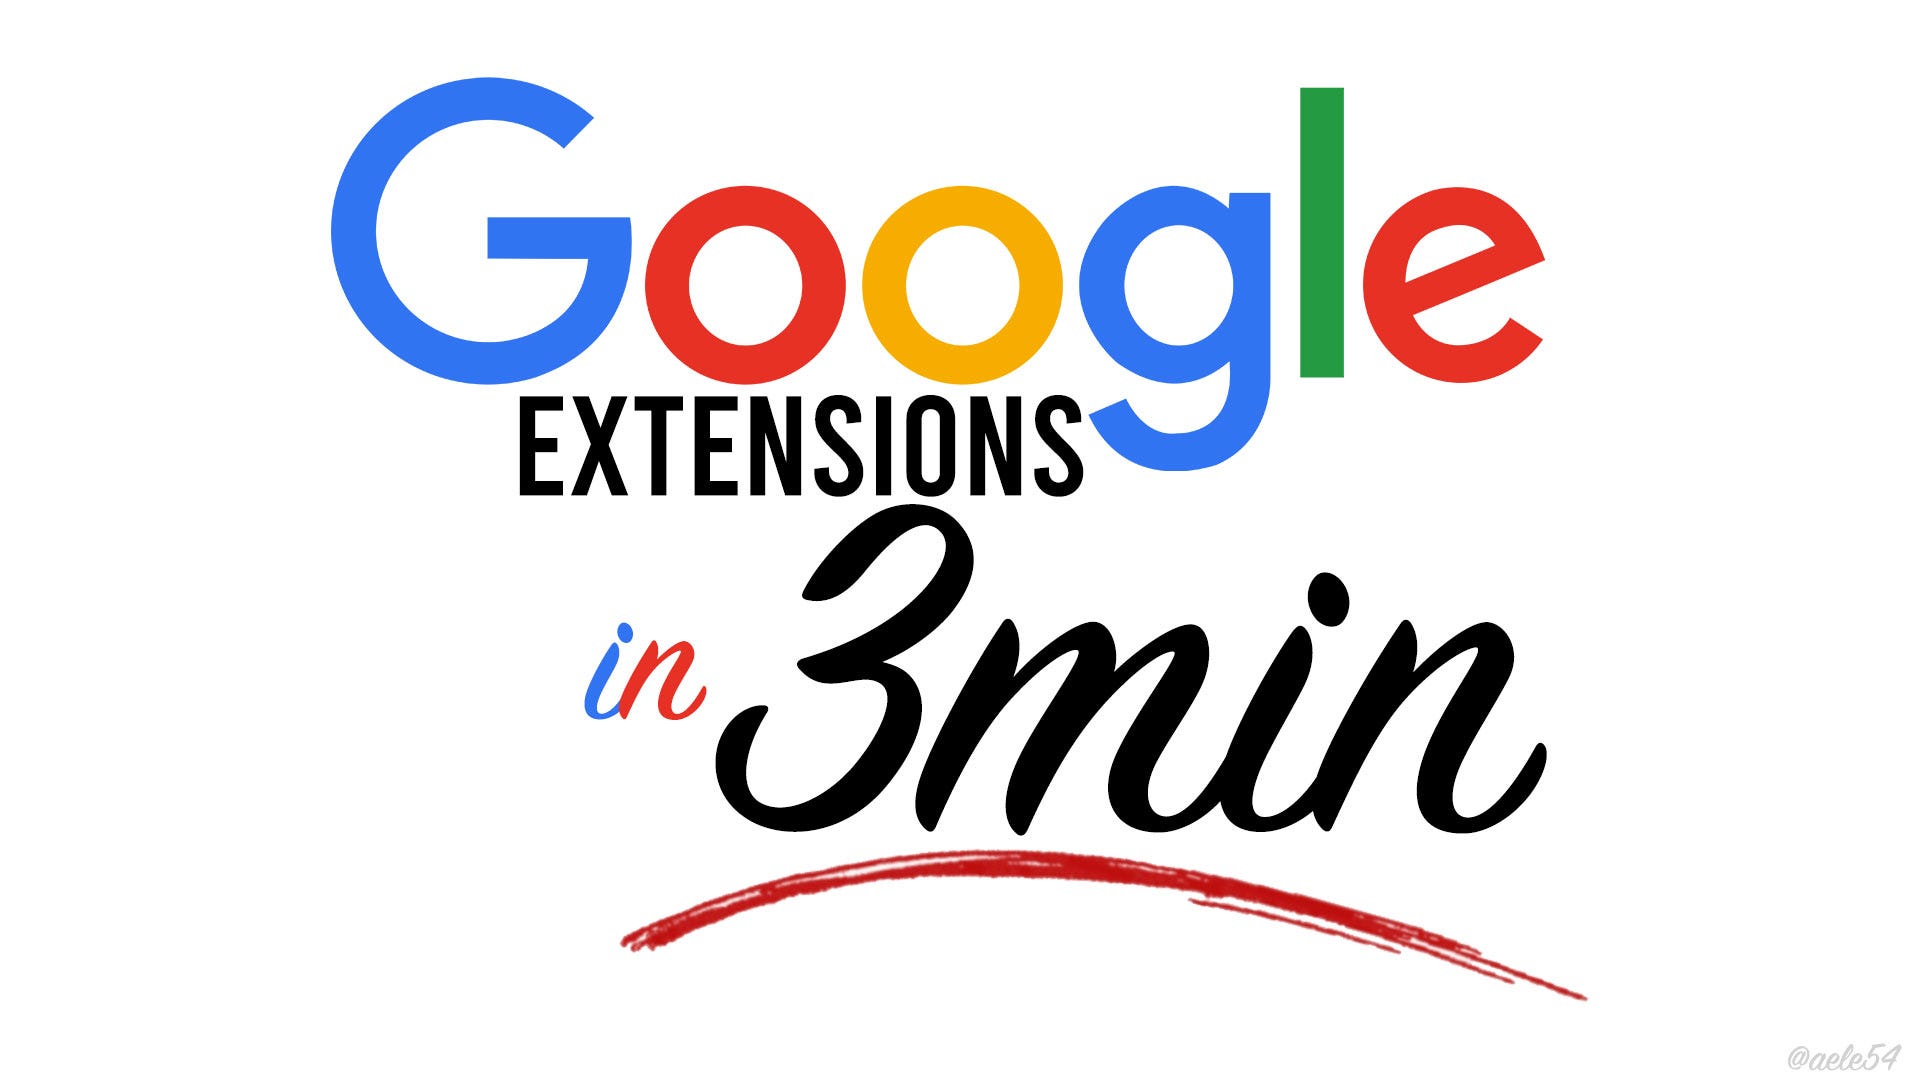 How to Create Chrome Extensions. A step by step tutorial on how to